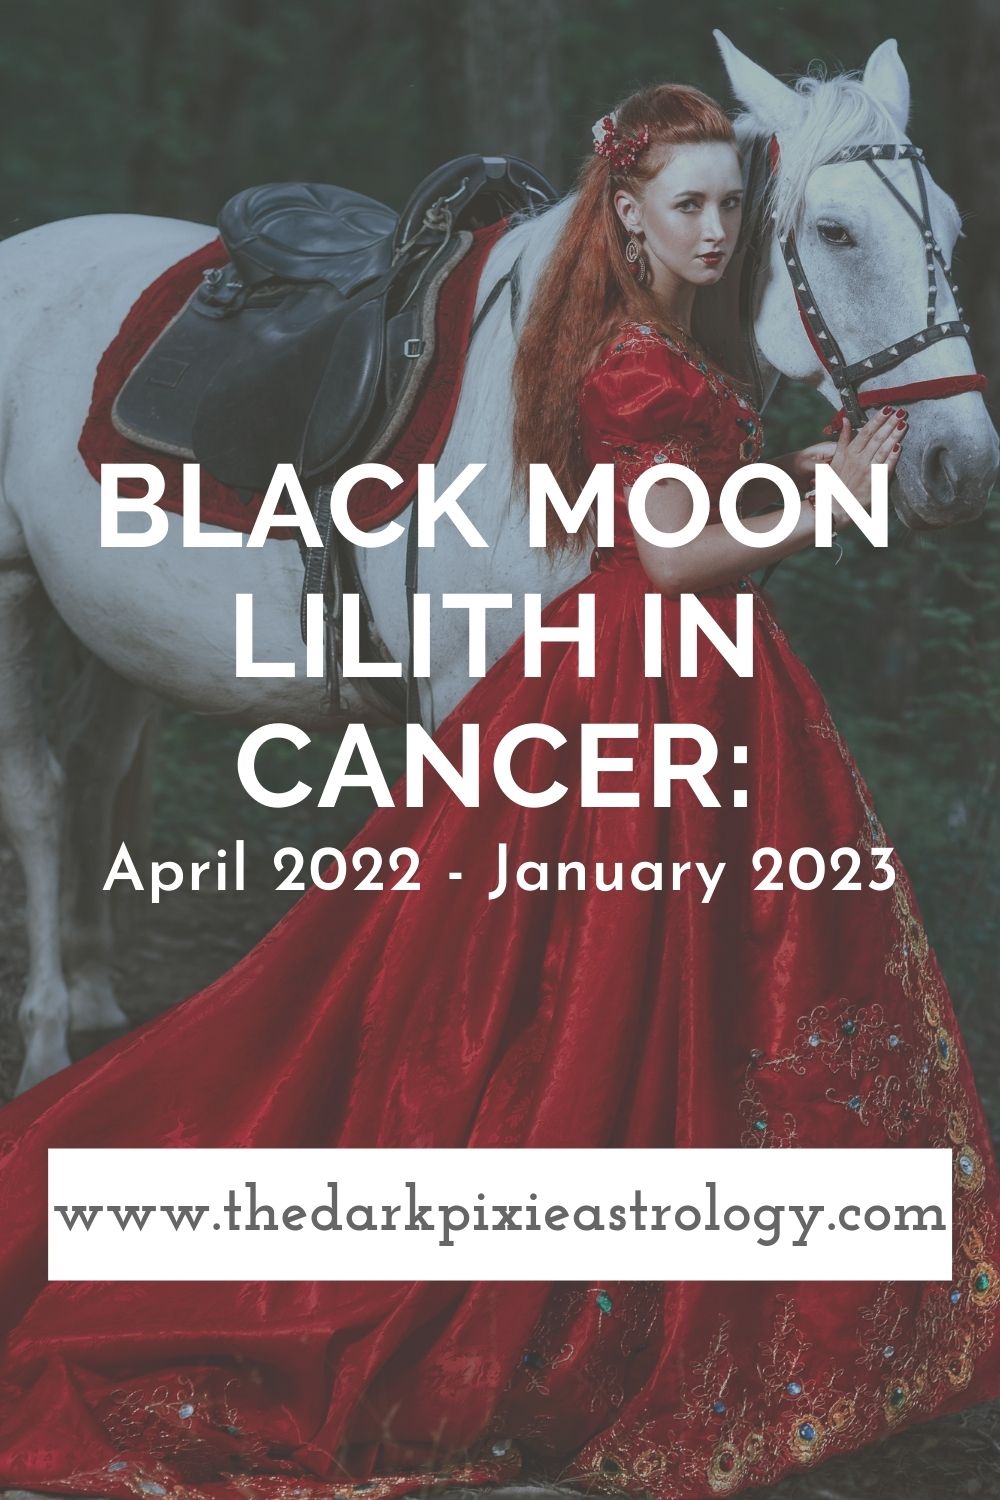 Black Moon Lilith in Cancer: April 2022 - January 2023 - The Dark Pixie Astrology